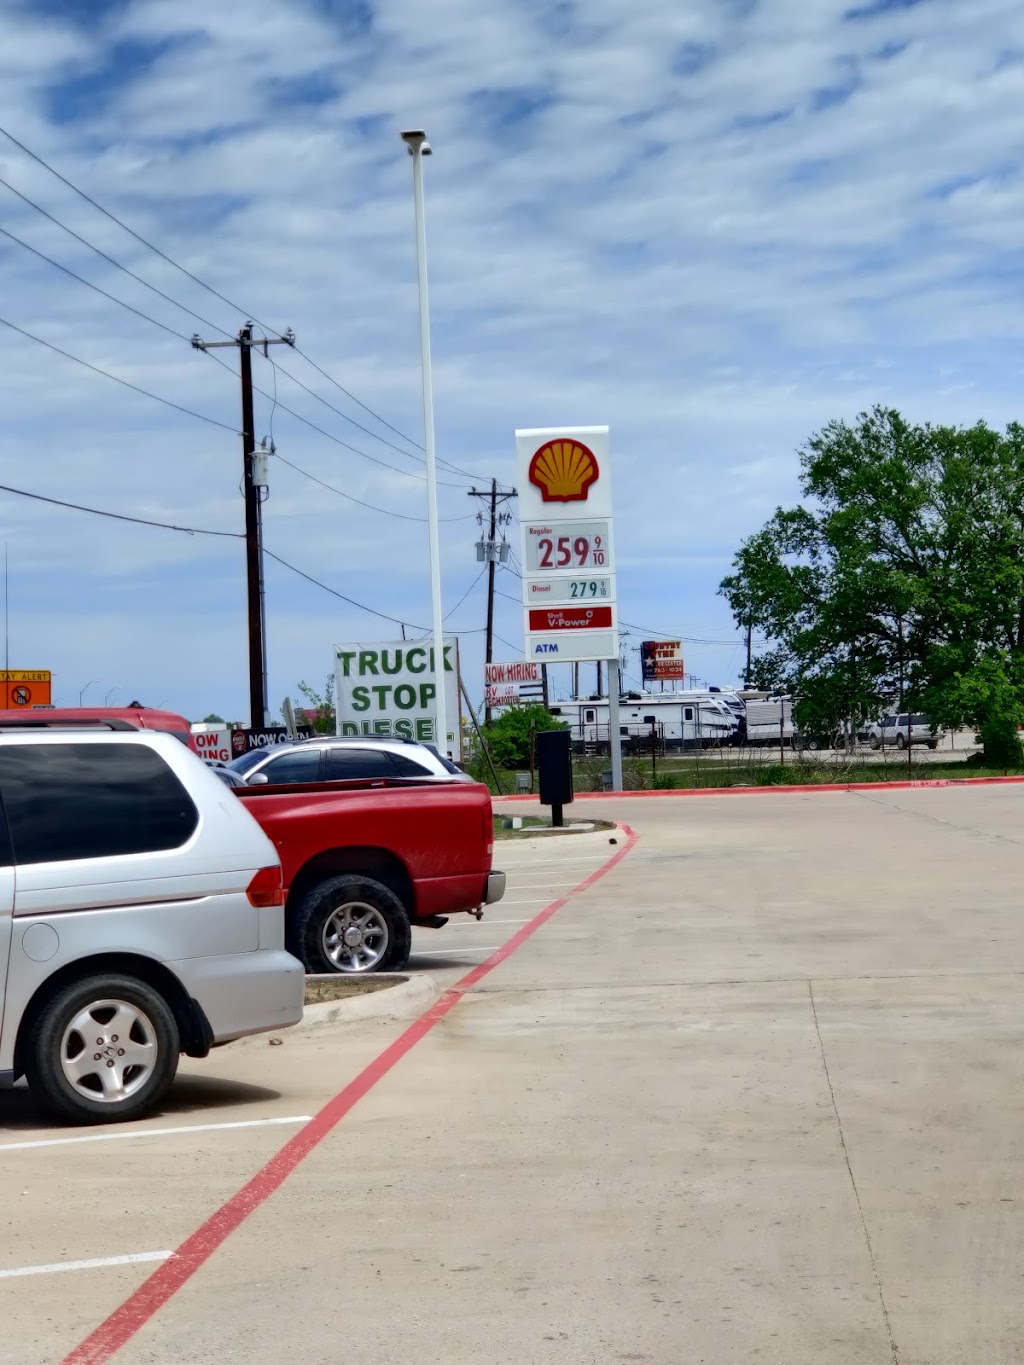 Shell | restaurant | 4610 S IH 35 Service Rd, Georgetown, TX 78626, USA | 5126885152 OR +1 512-688-5152